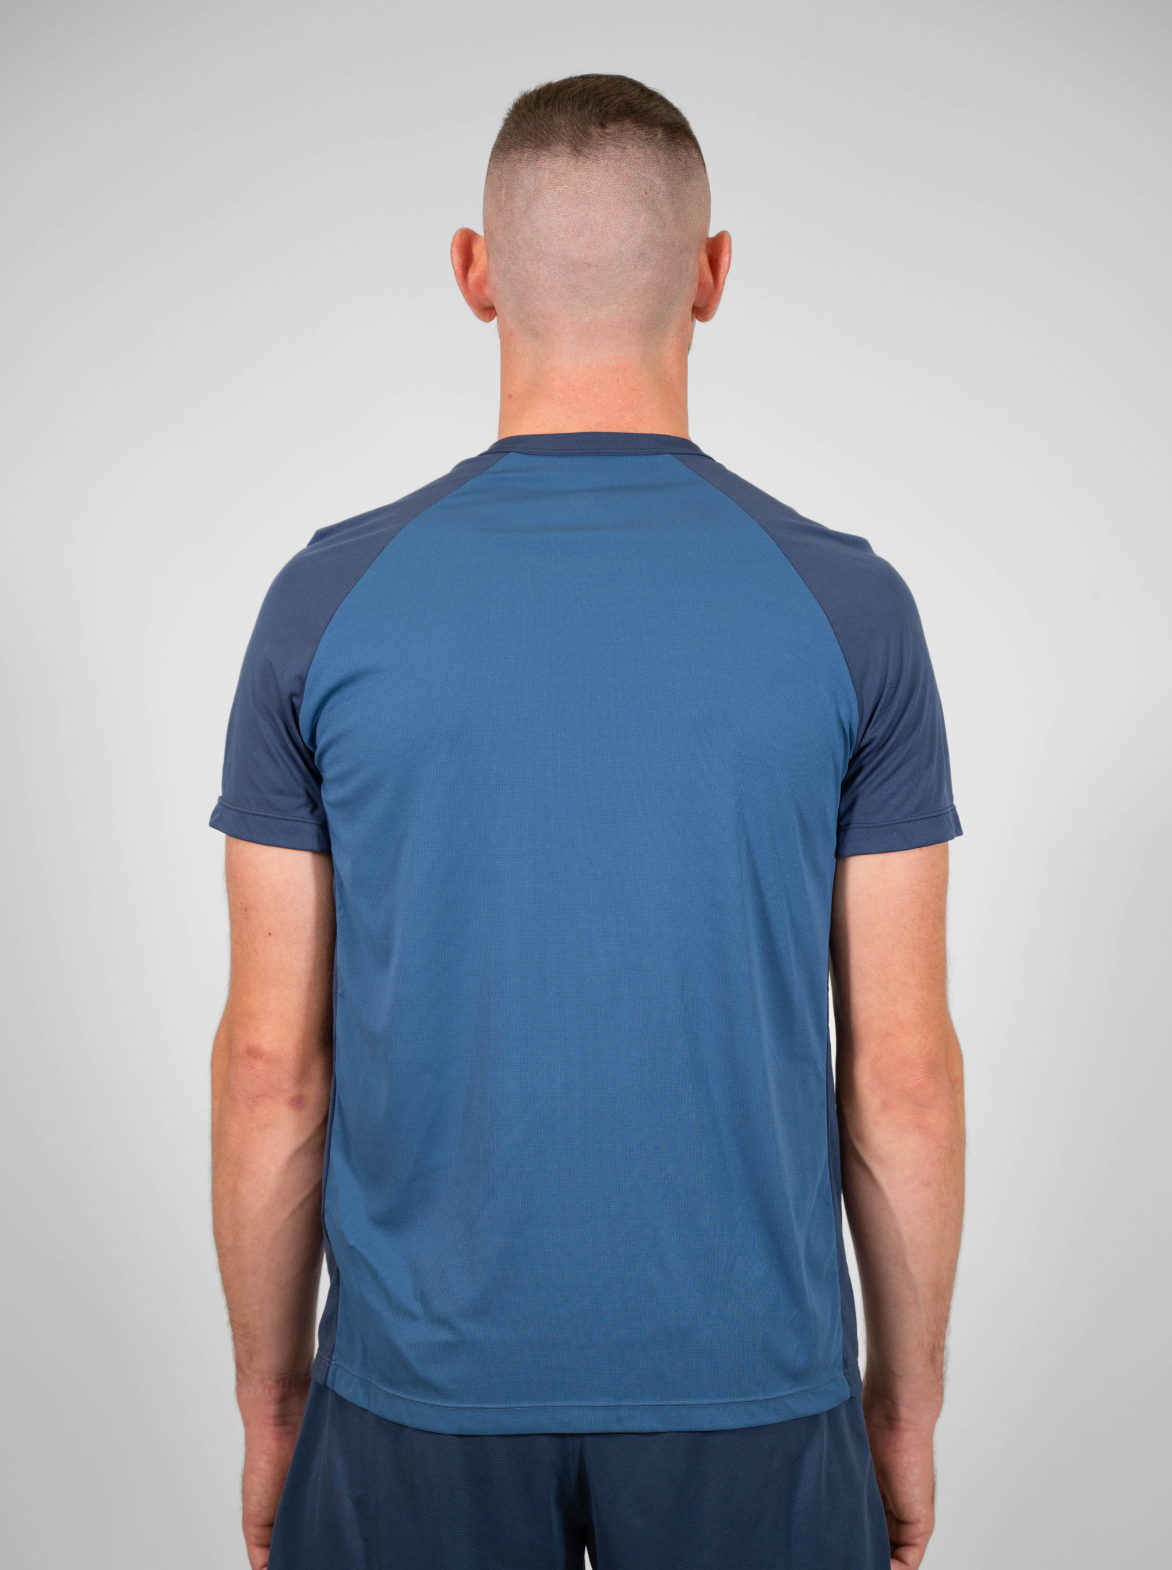 Men's Sustainable Running T-Shirt Made in France — TOULON